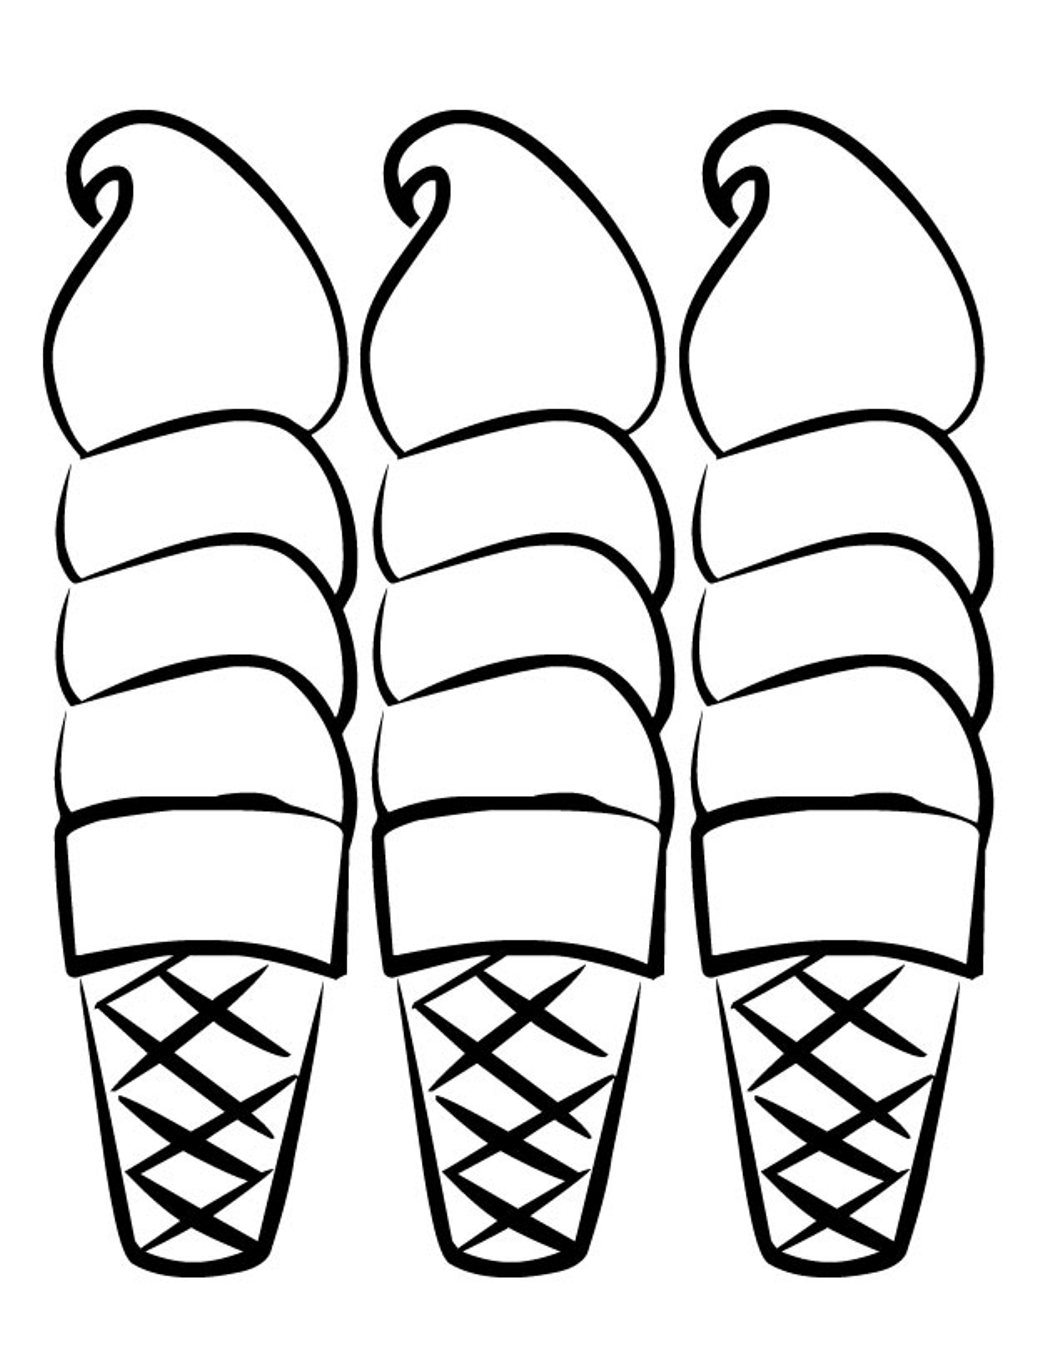 Ice Cream Cone Coloring Page at Free